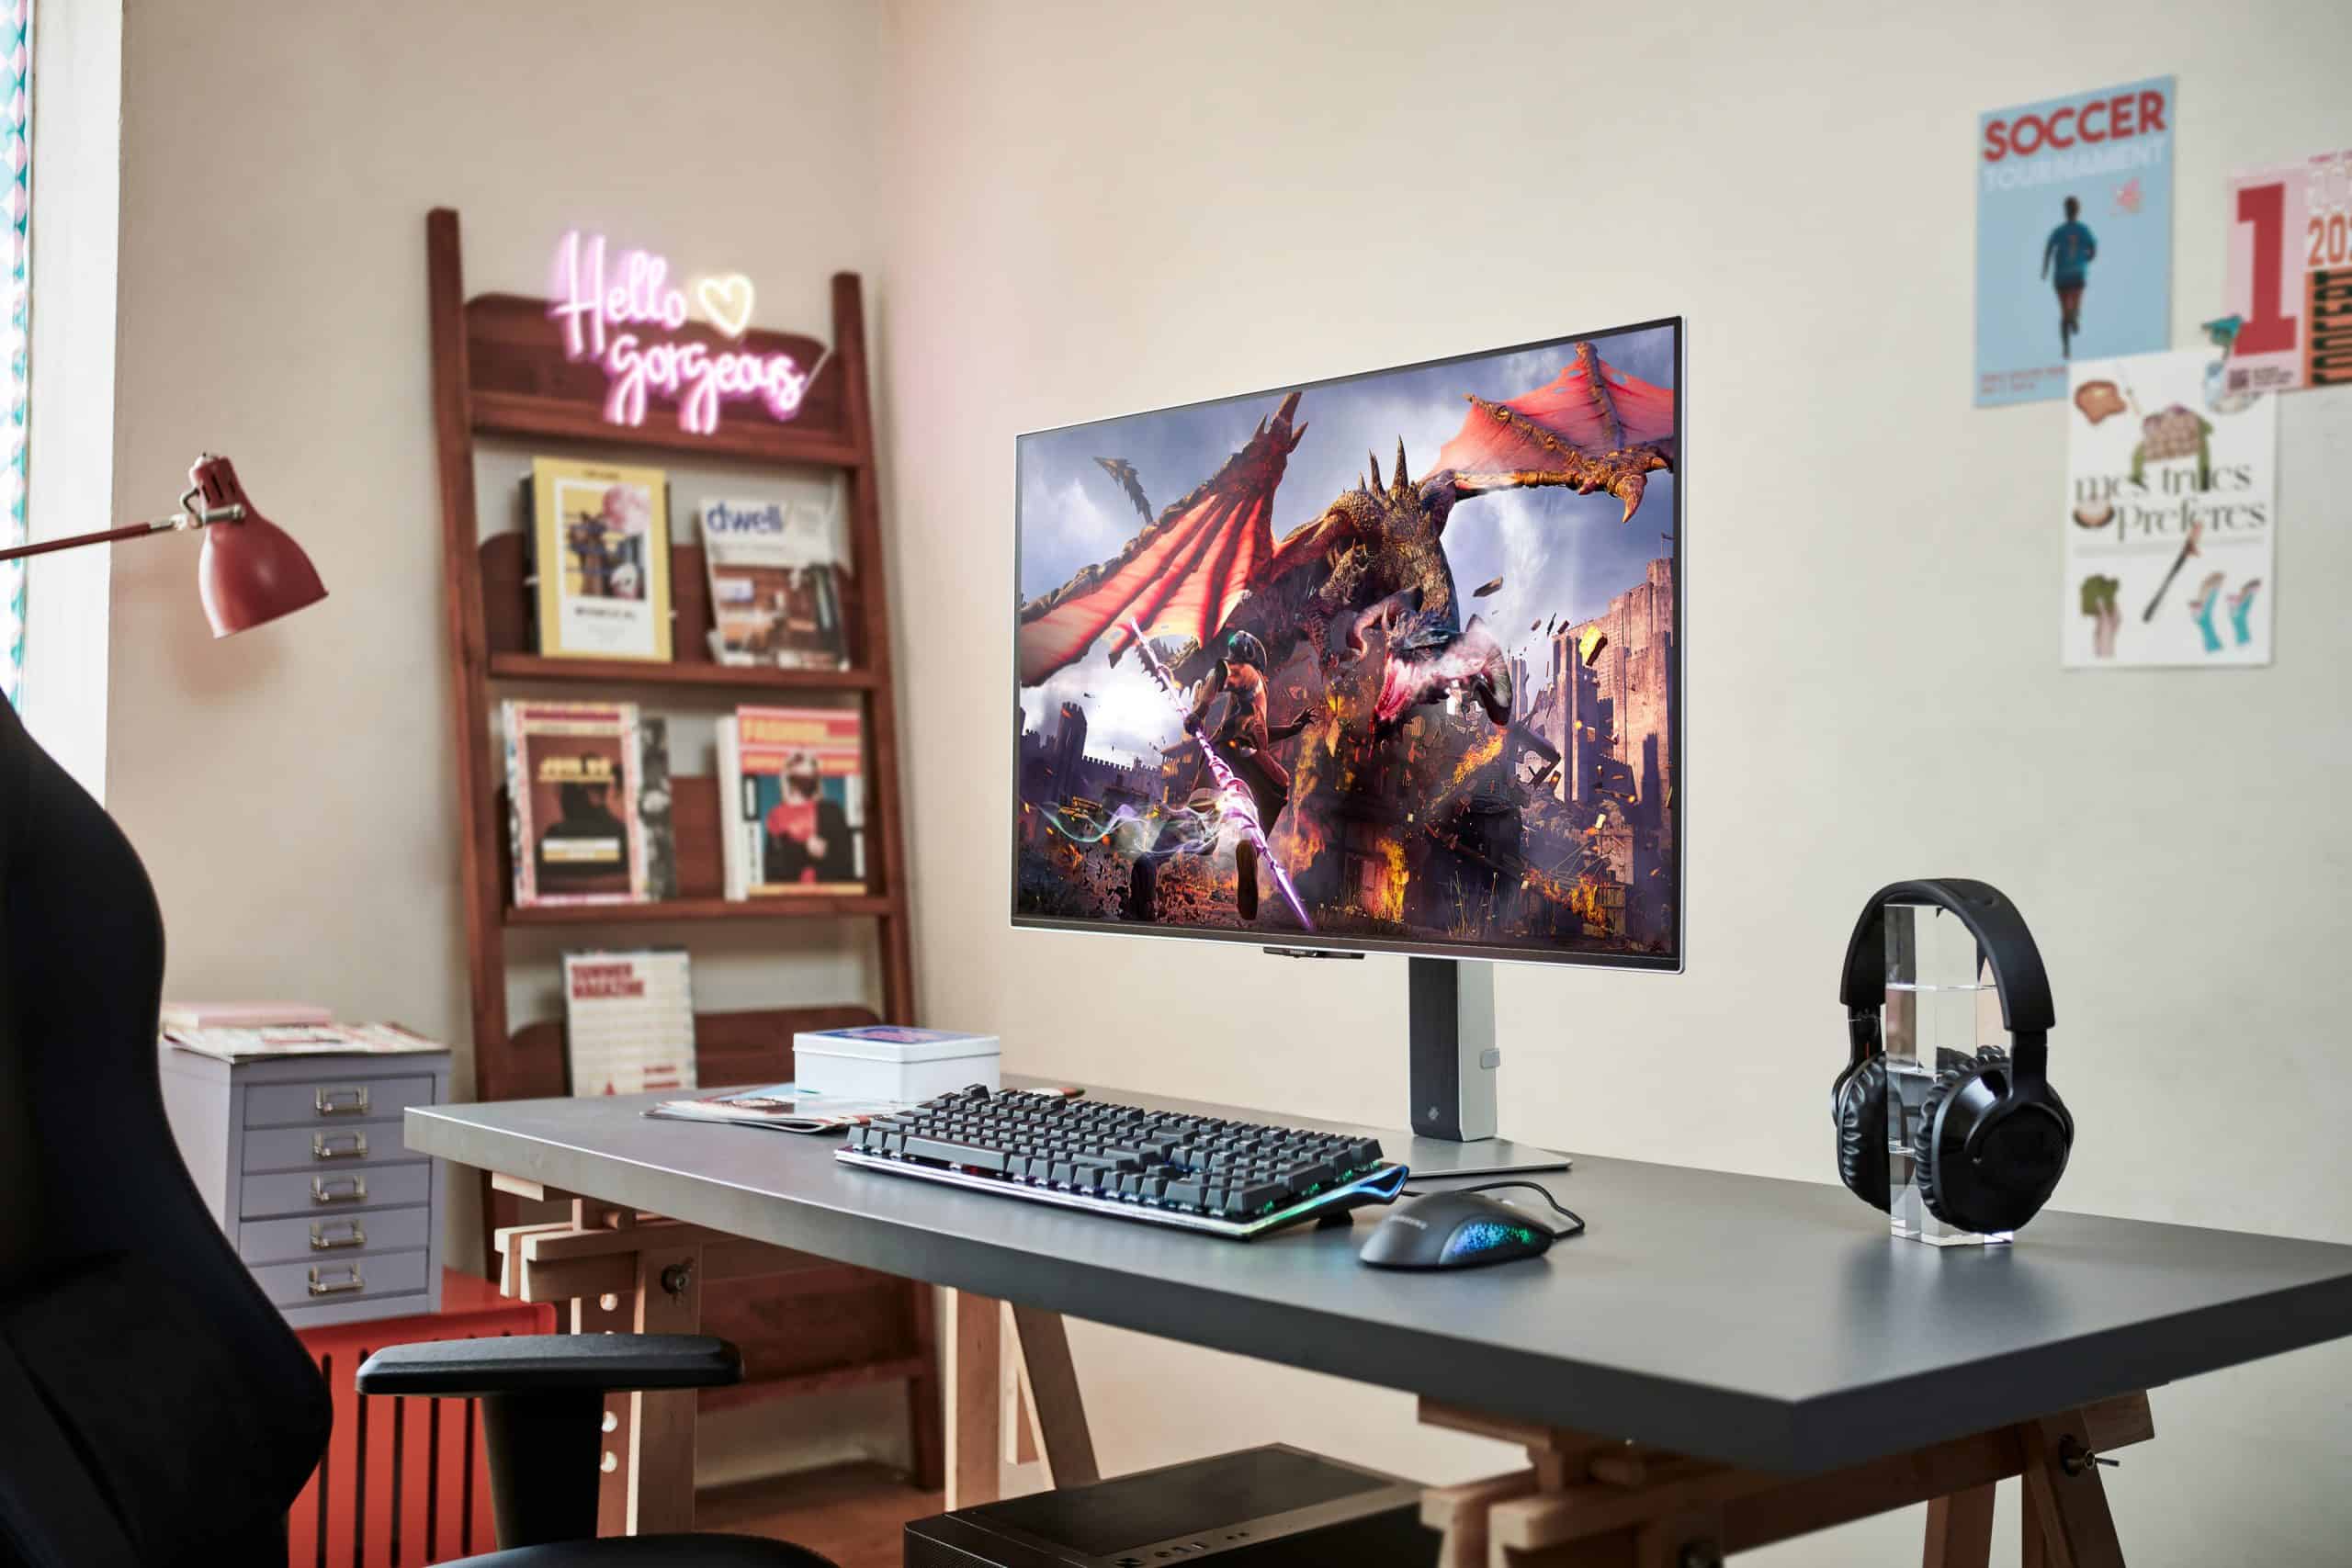 Samsung's latest Odyssey gaming monitors are available for pre-order